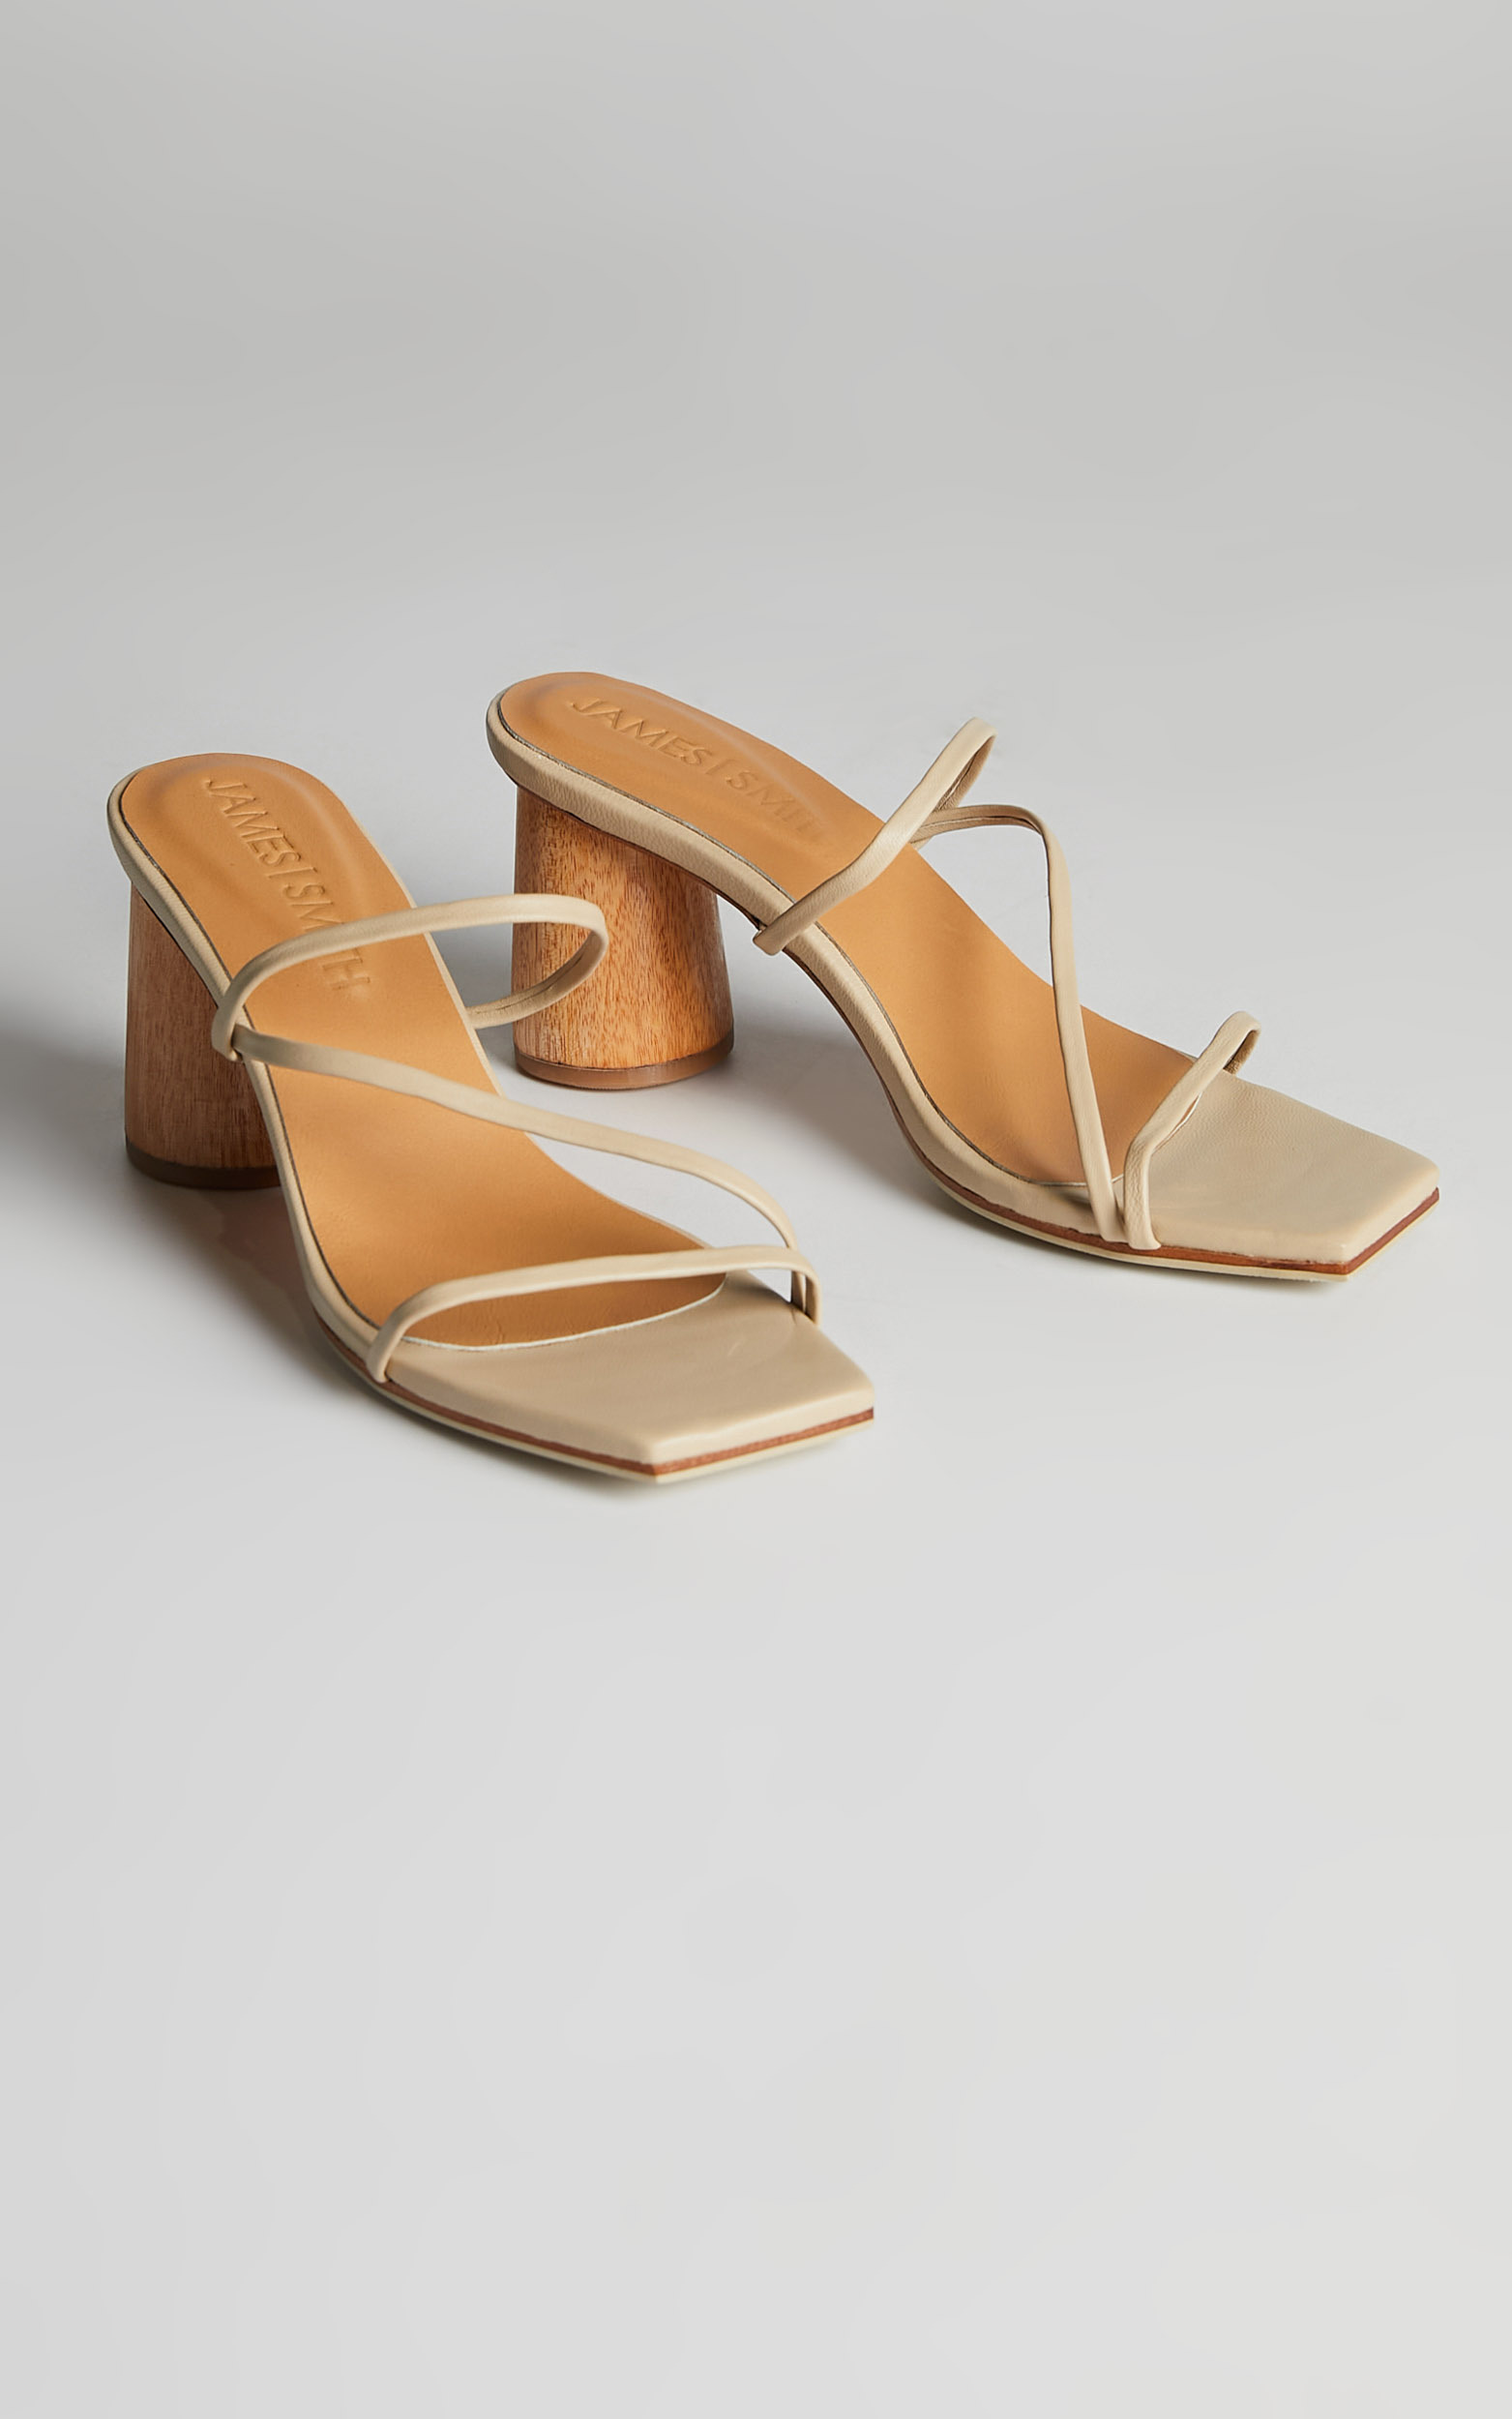 James Smith - Amore Mio Strappy Sandal in Nude - 05, BRN3, hi-res image number null